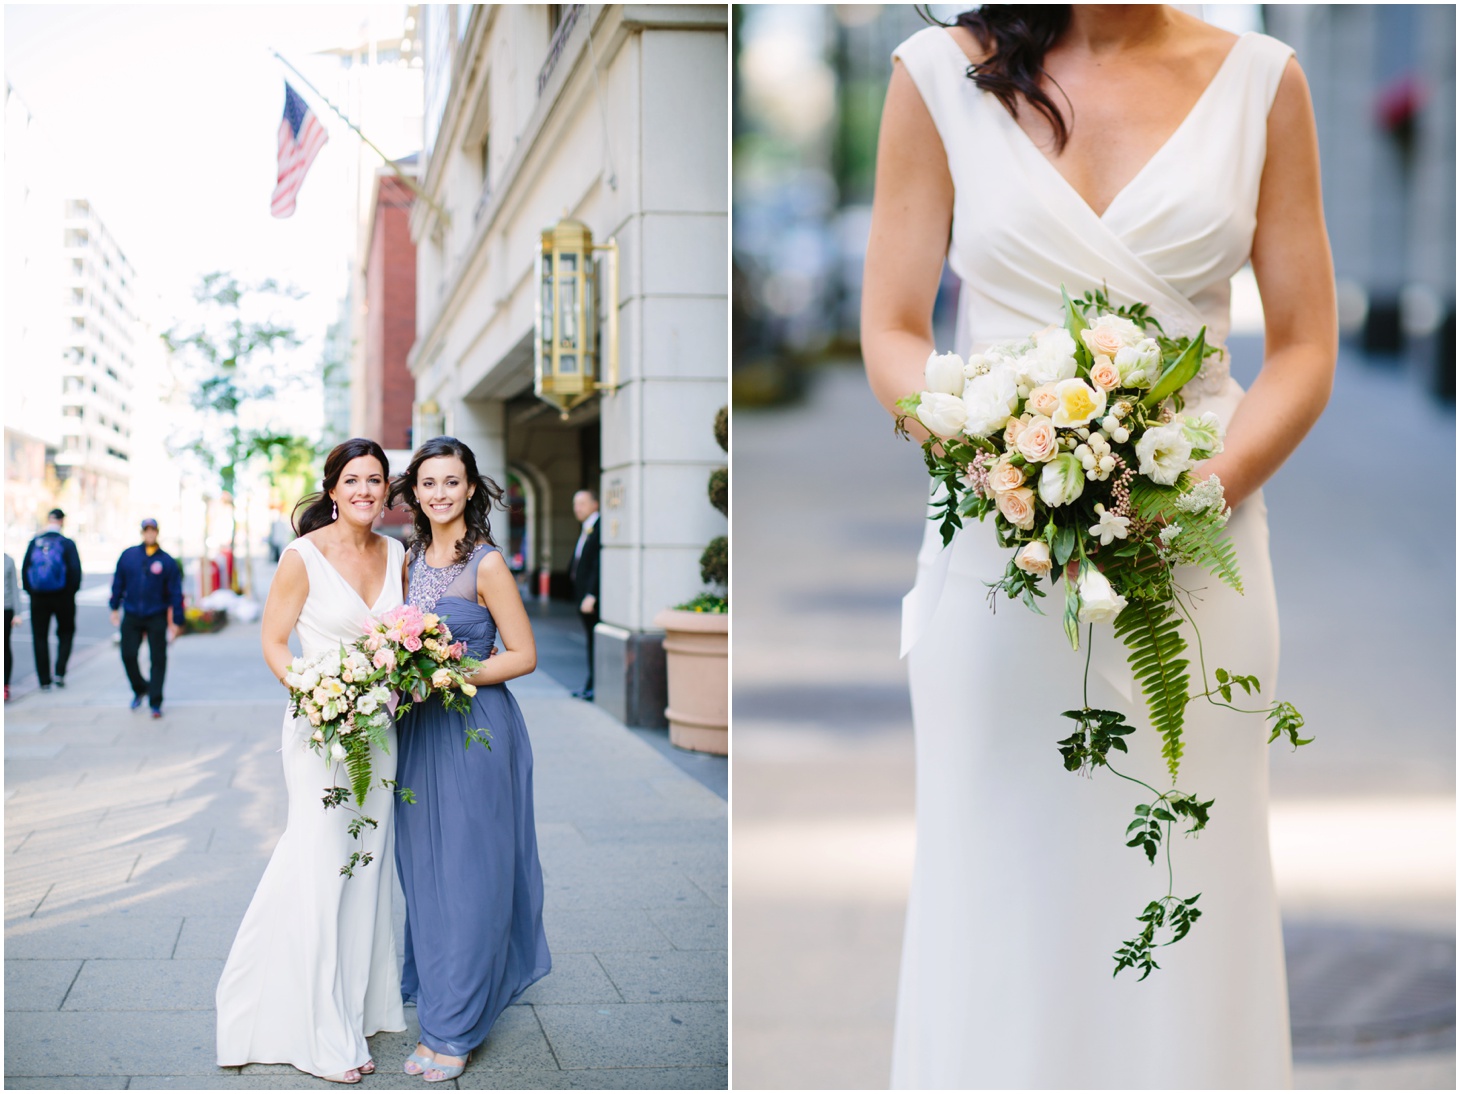 Mikey & Megan, Downtown DC Wedding at National Museum of Women in the Arts by Sarah Bradshaw Photography_0019.jpg